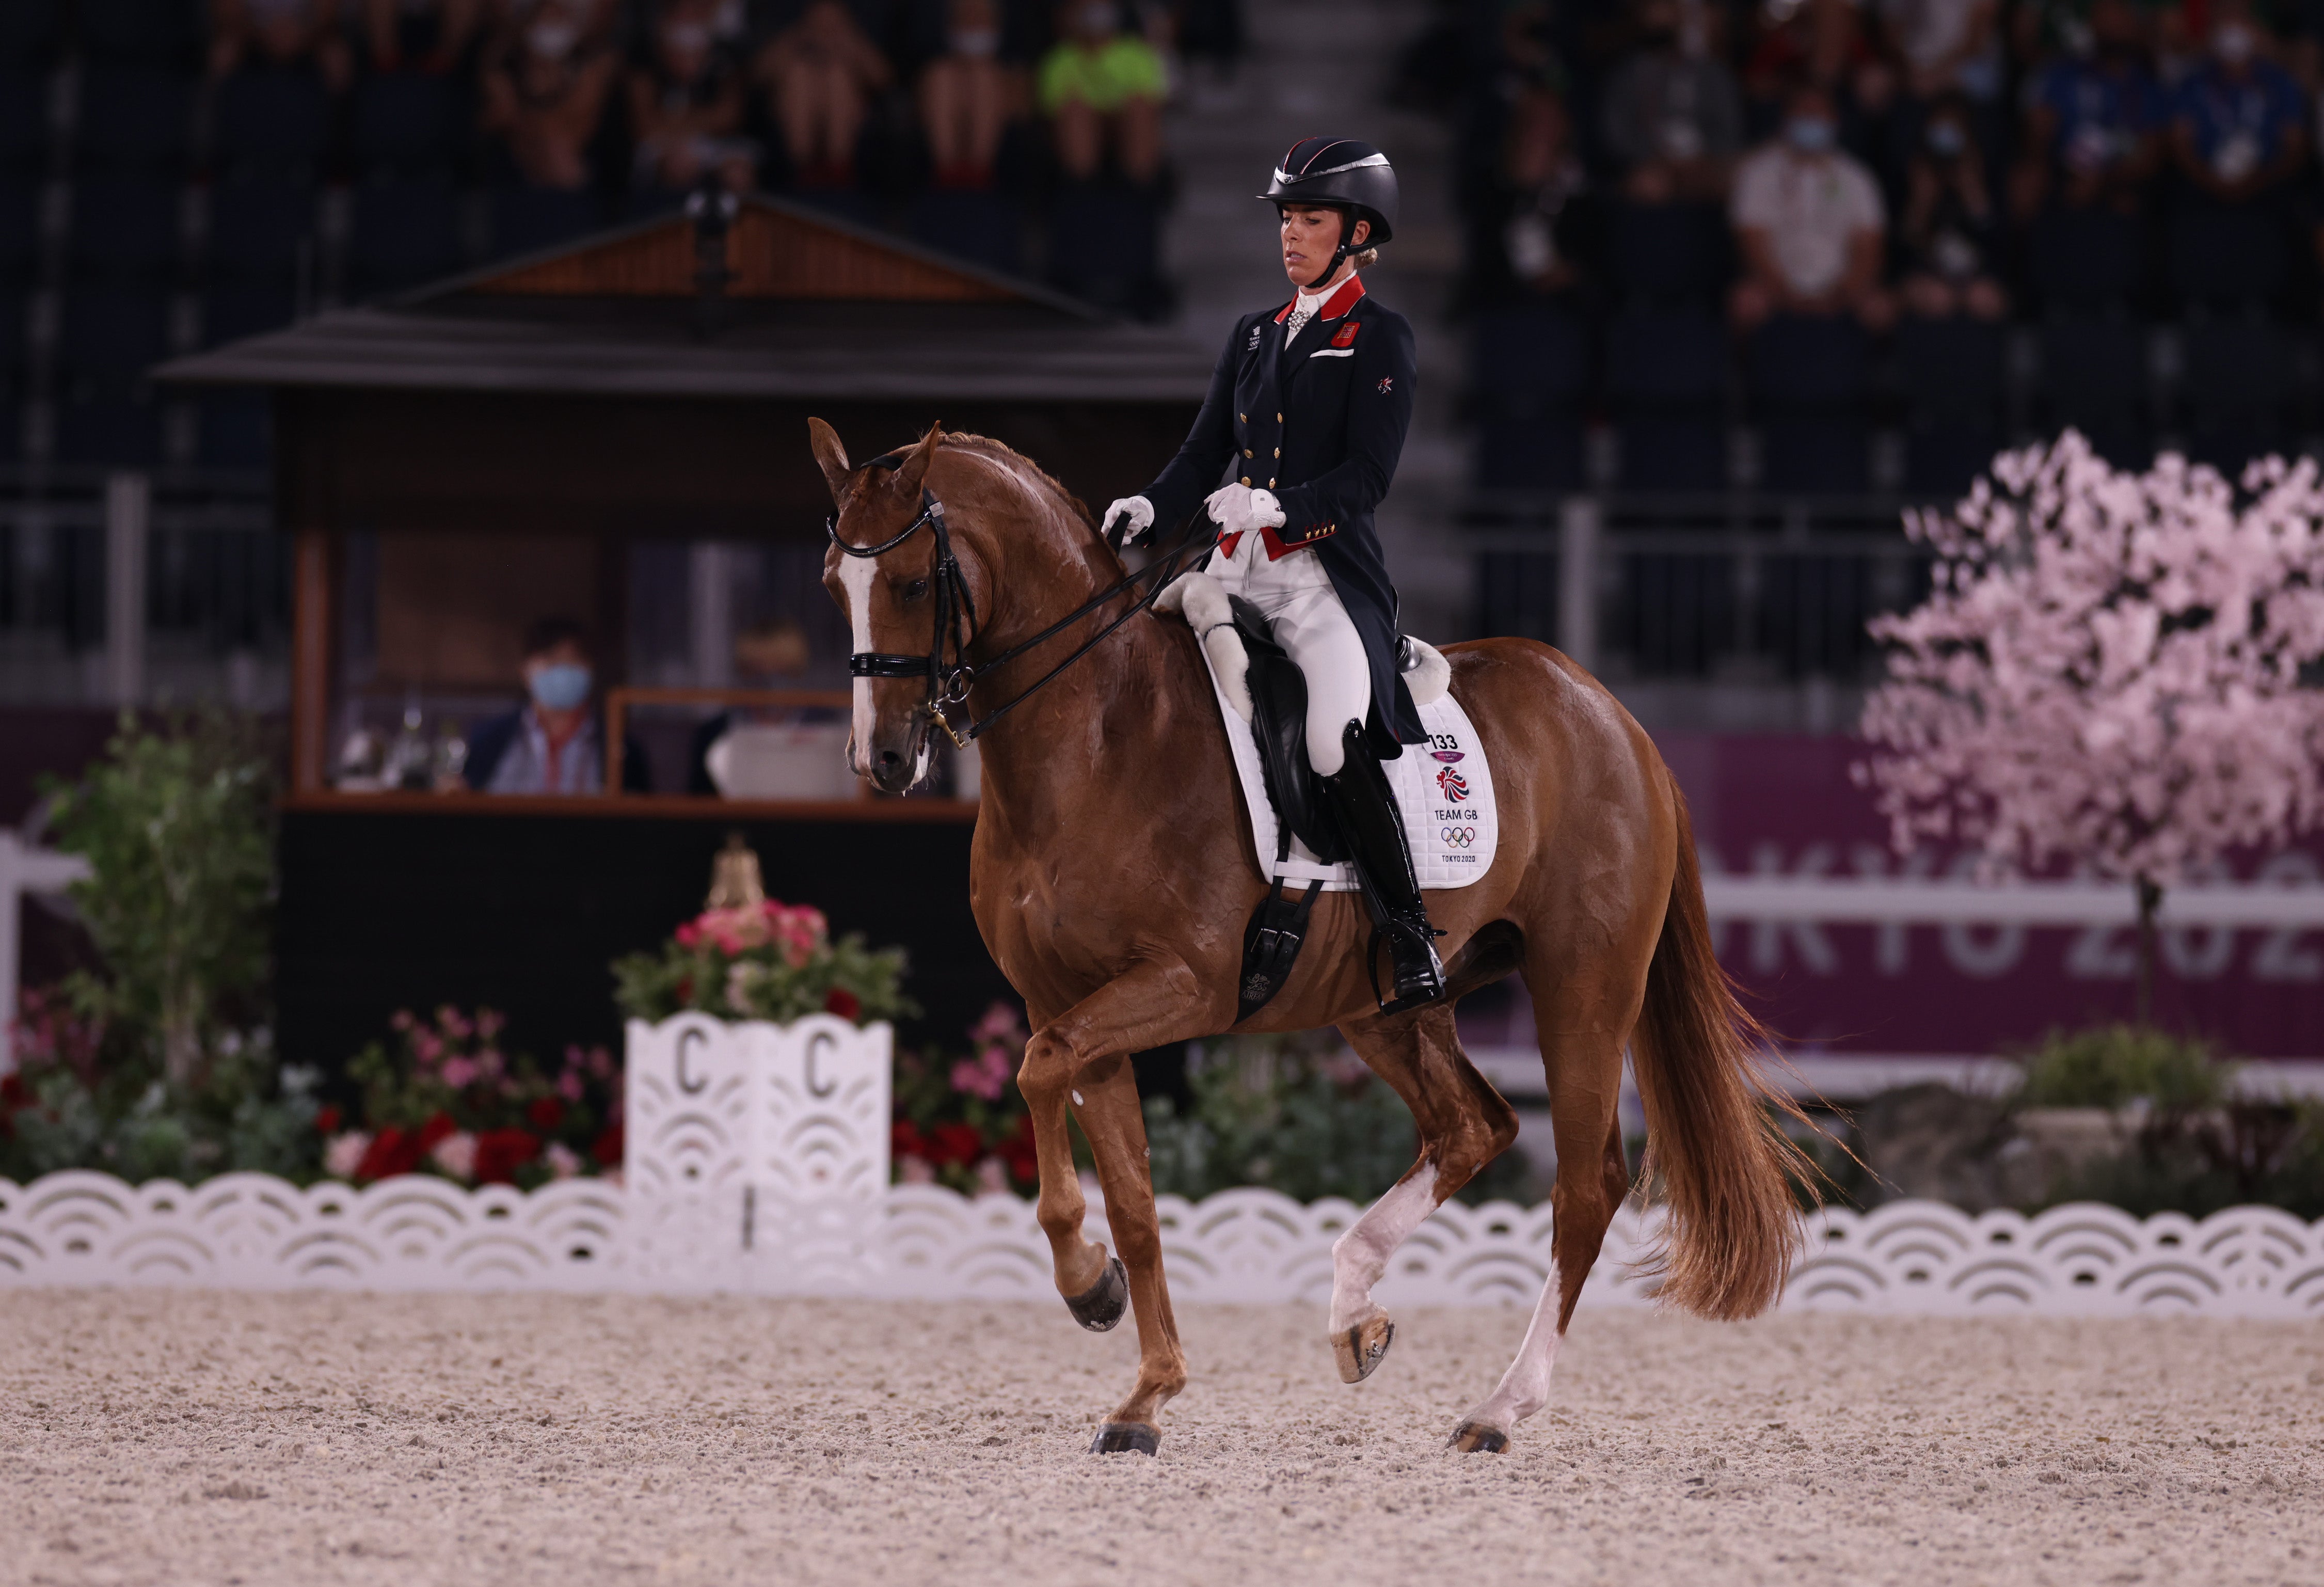 Dujardin and Gio won team and individual bronze at Equestrian Park on Wednesday